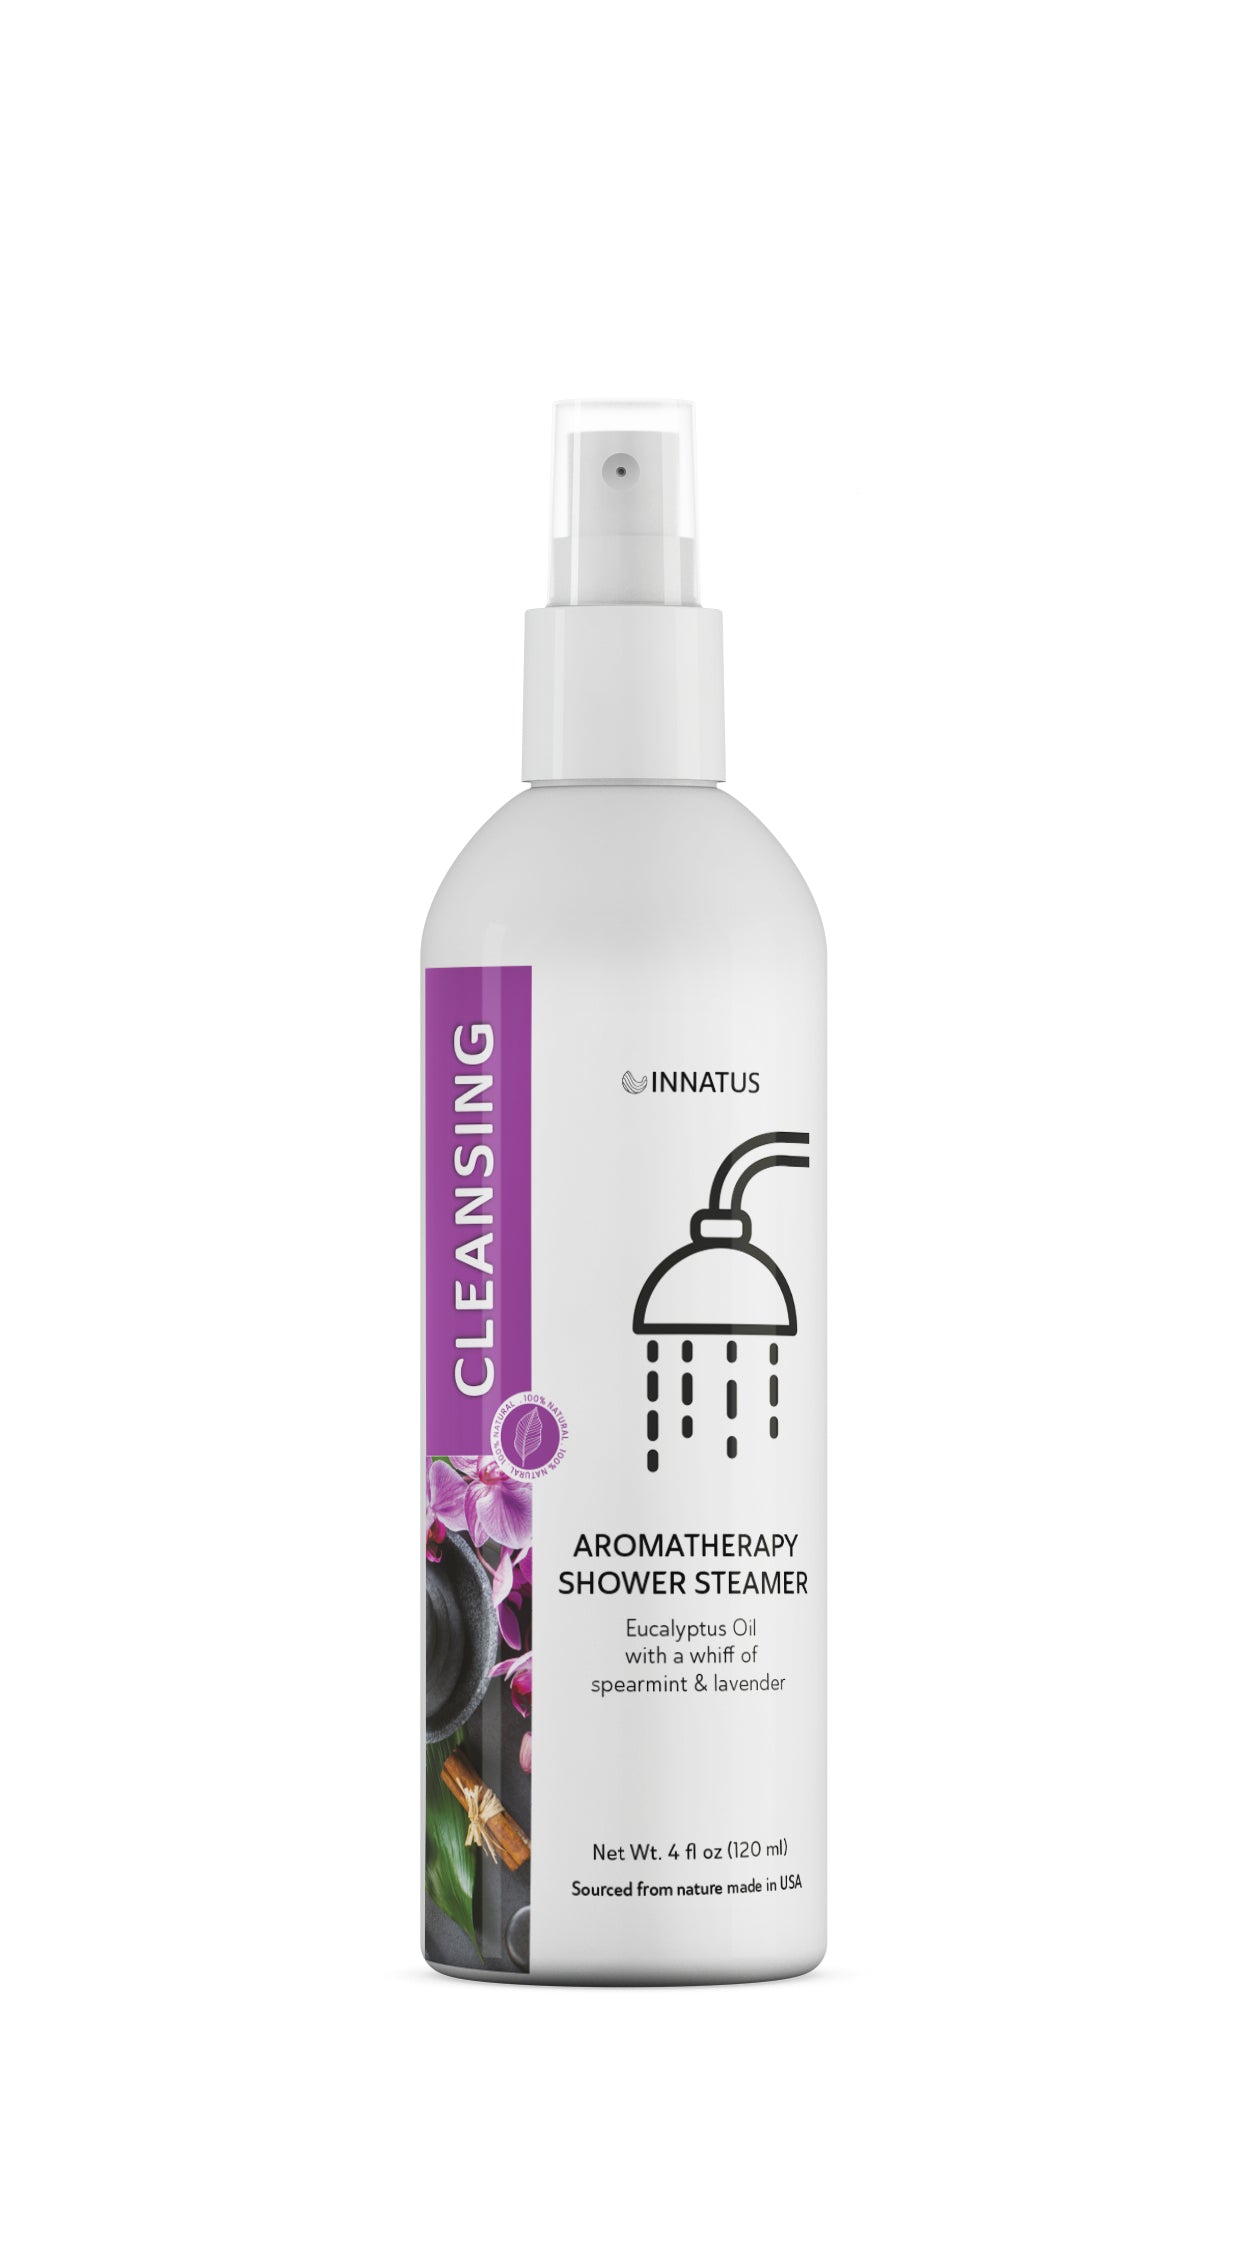 Cleansing shower spray eucalyptus oil with a whiff of Spearmint